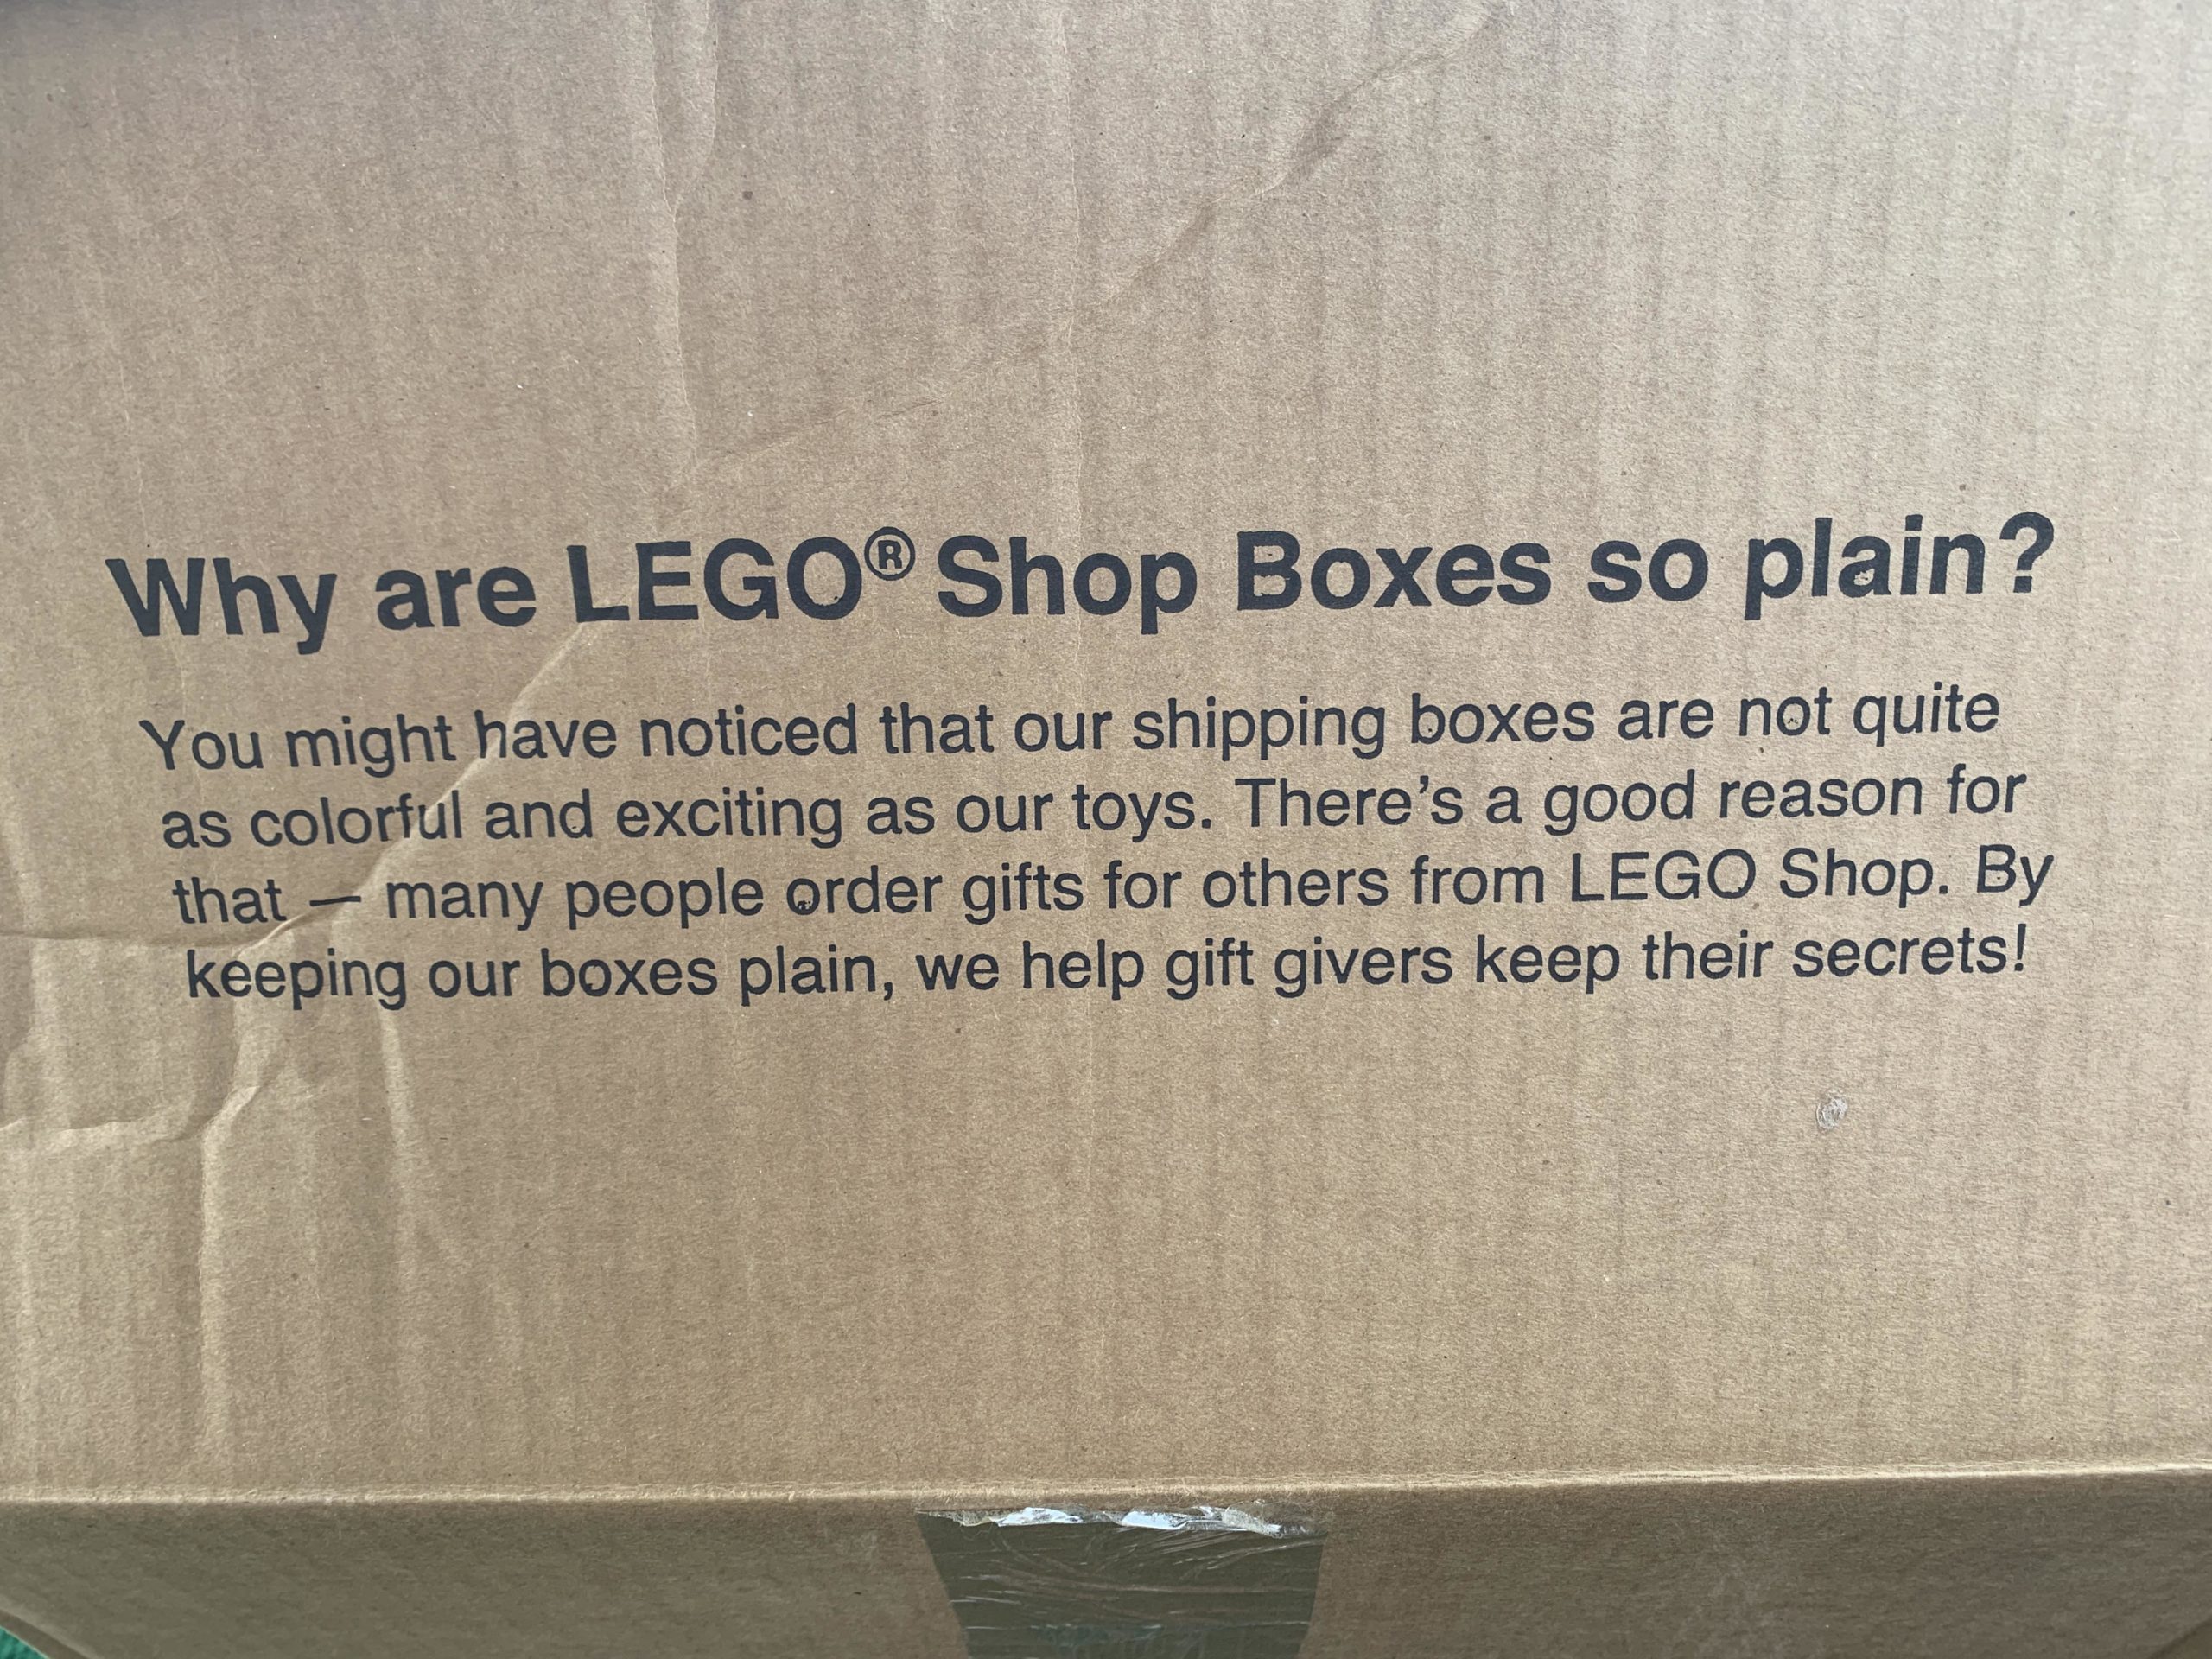 LEGO+shipping+boxes+are+purposely+plain+to+hide+gifts